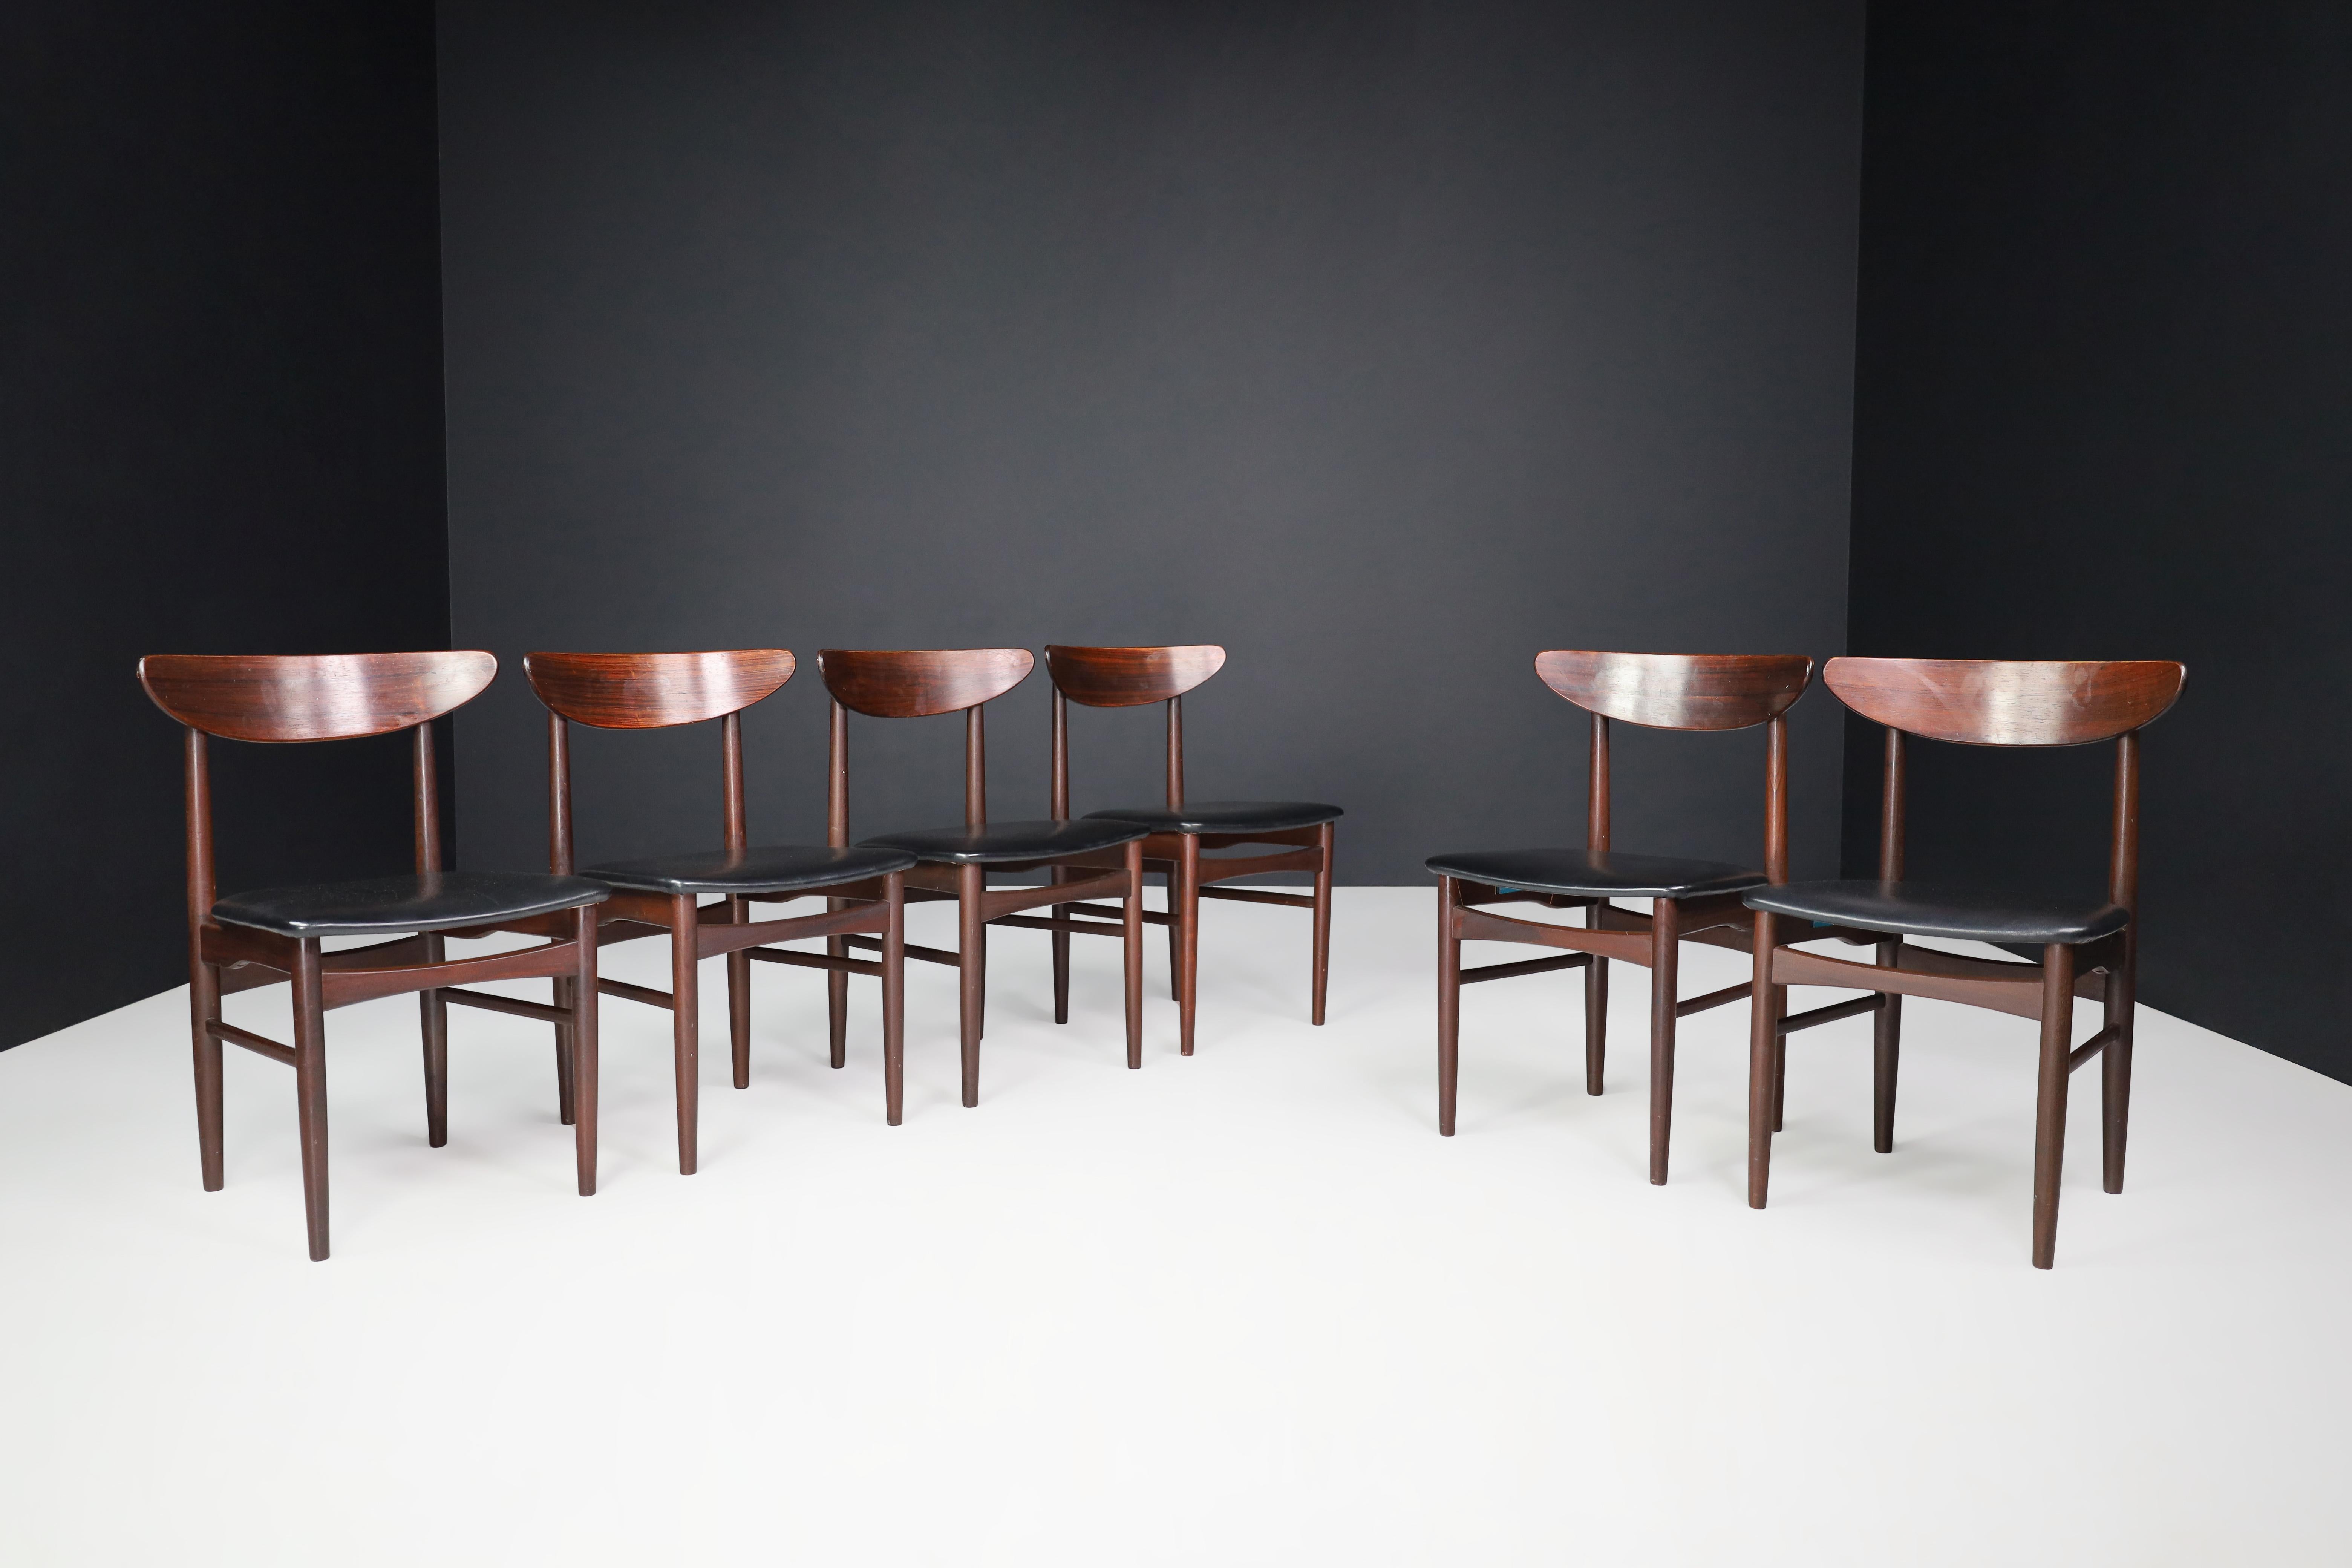 Dyrlund Hardwood and Black Leather Dining Chairs, Denmark, 1960s For Sale 4